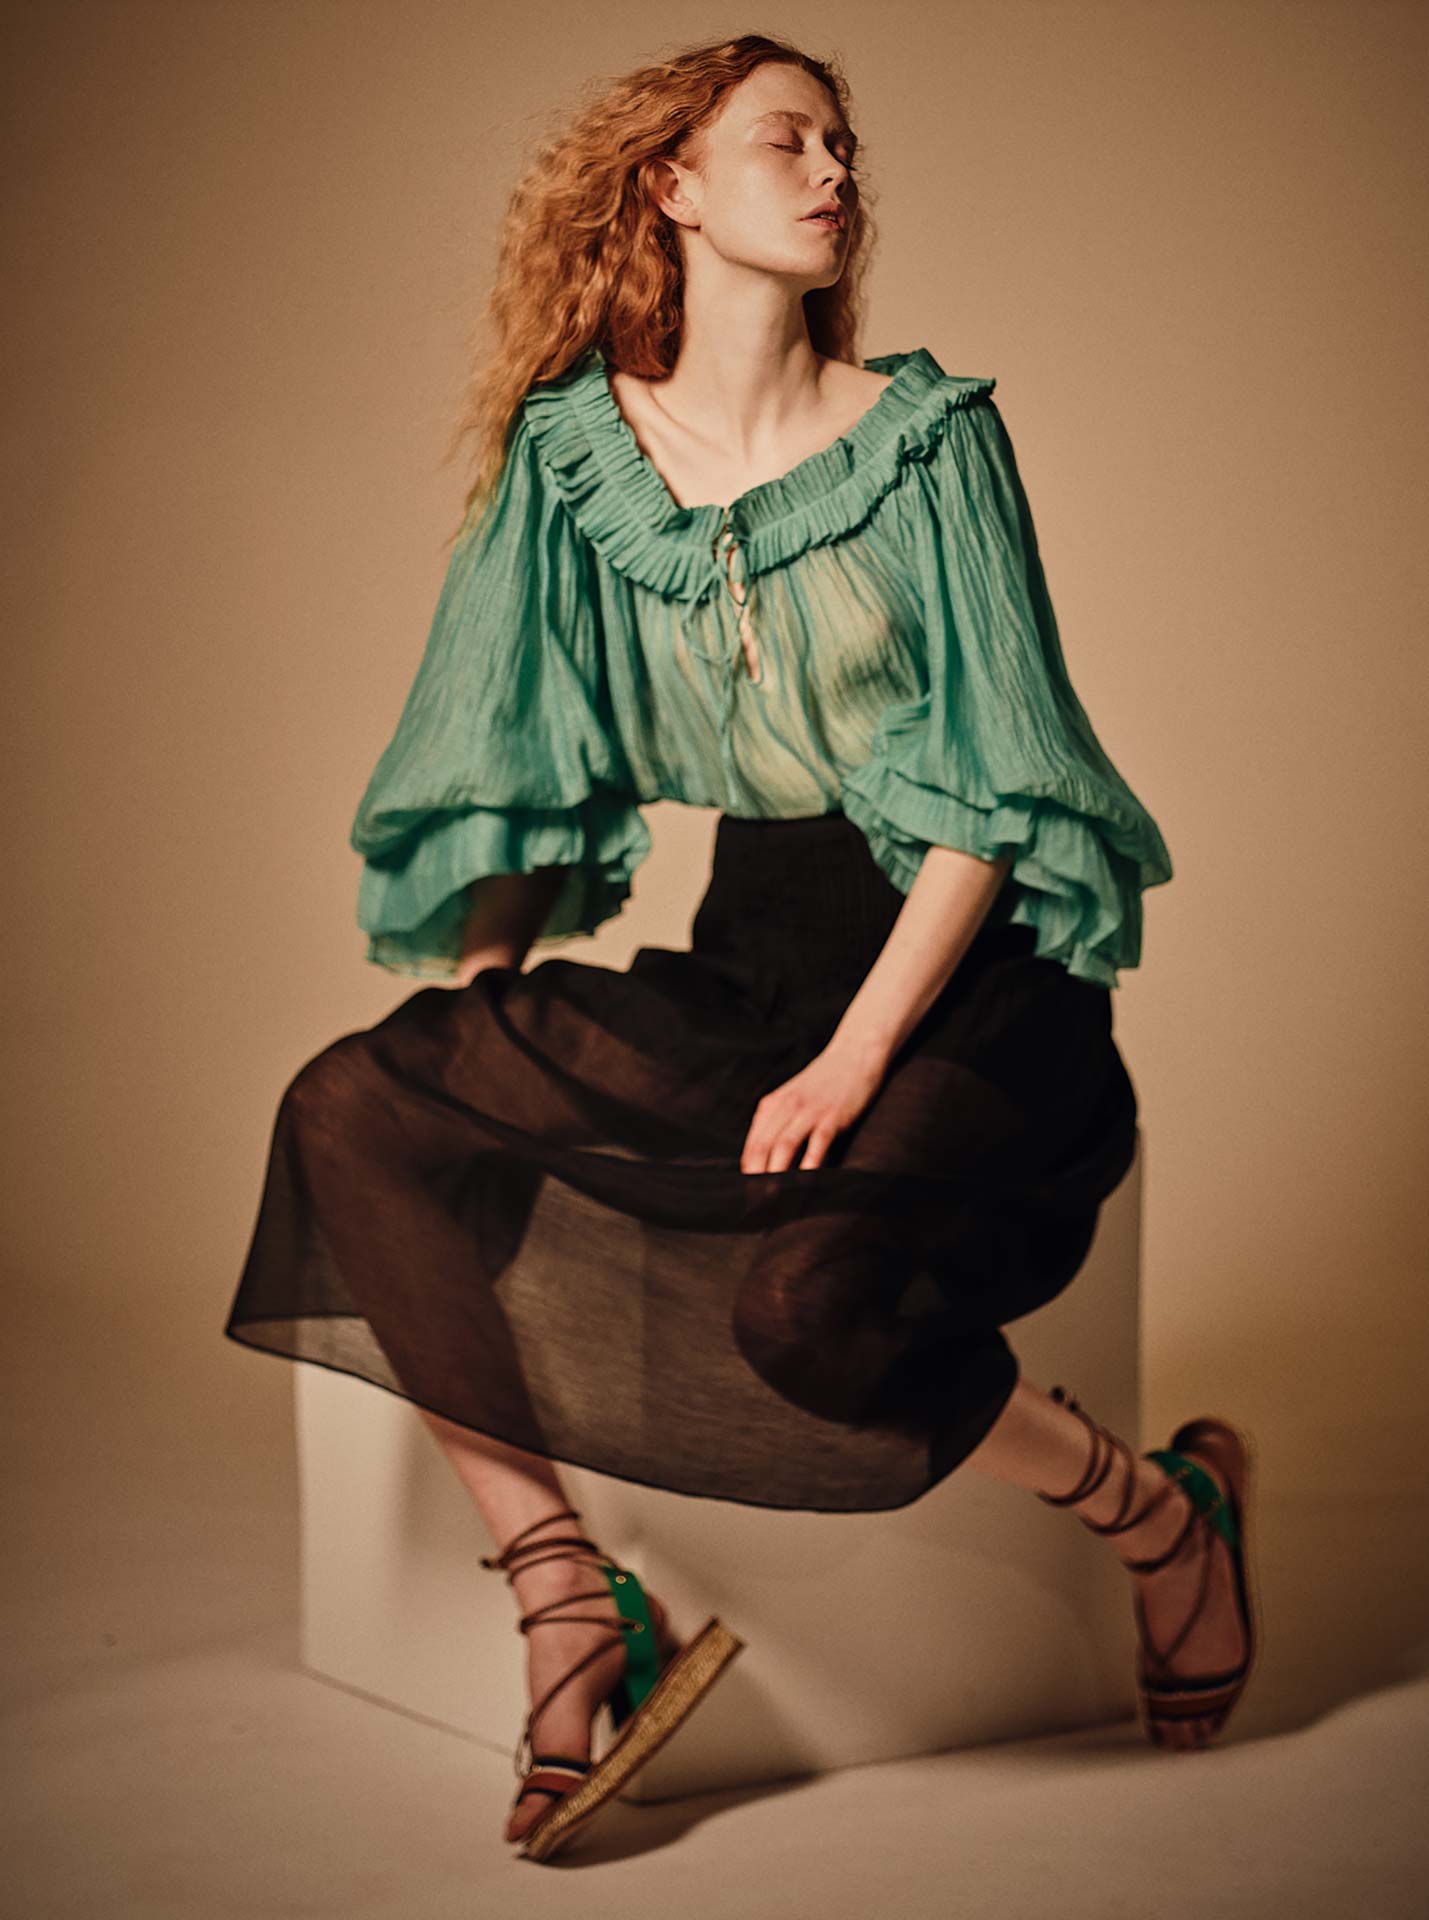 Front view of Roussia Veridian Green Blouse by Thierry Colson photographed by Stéphane Gautronneau